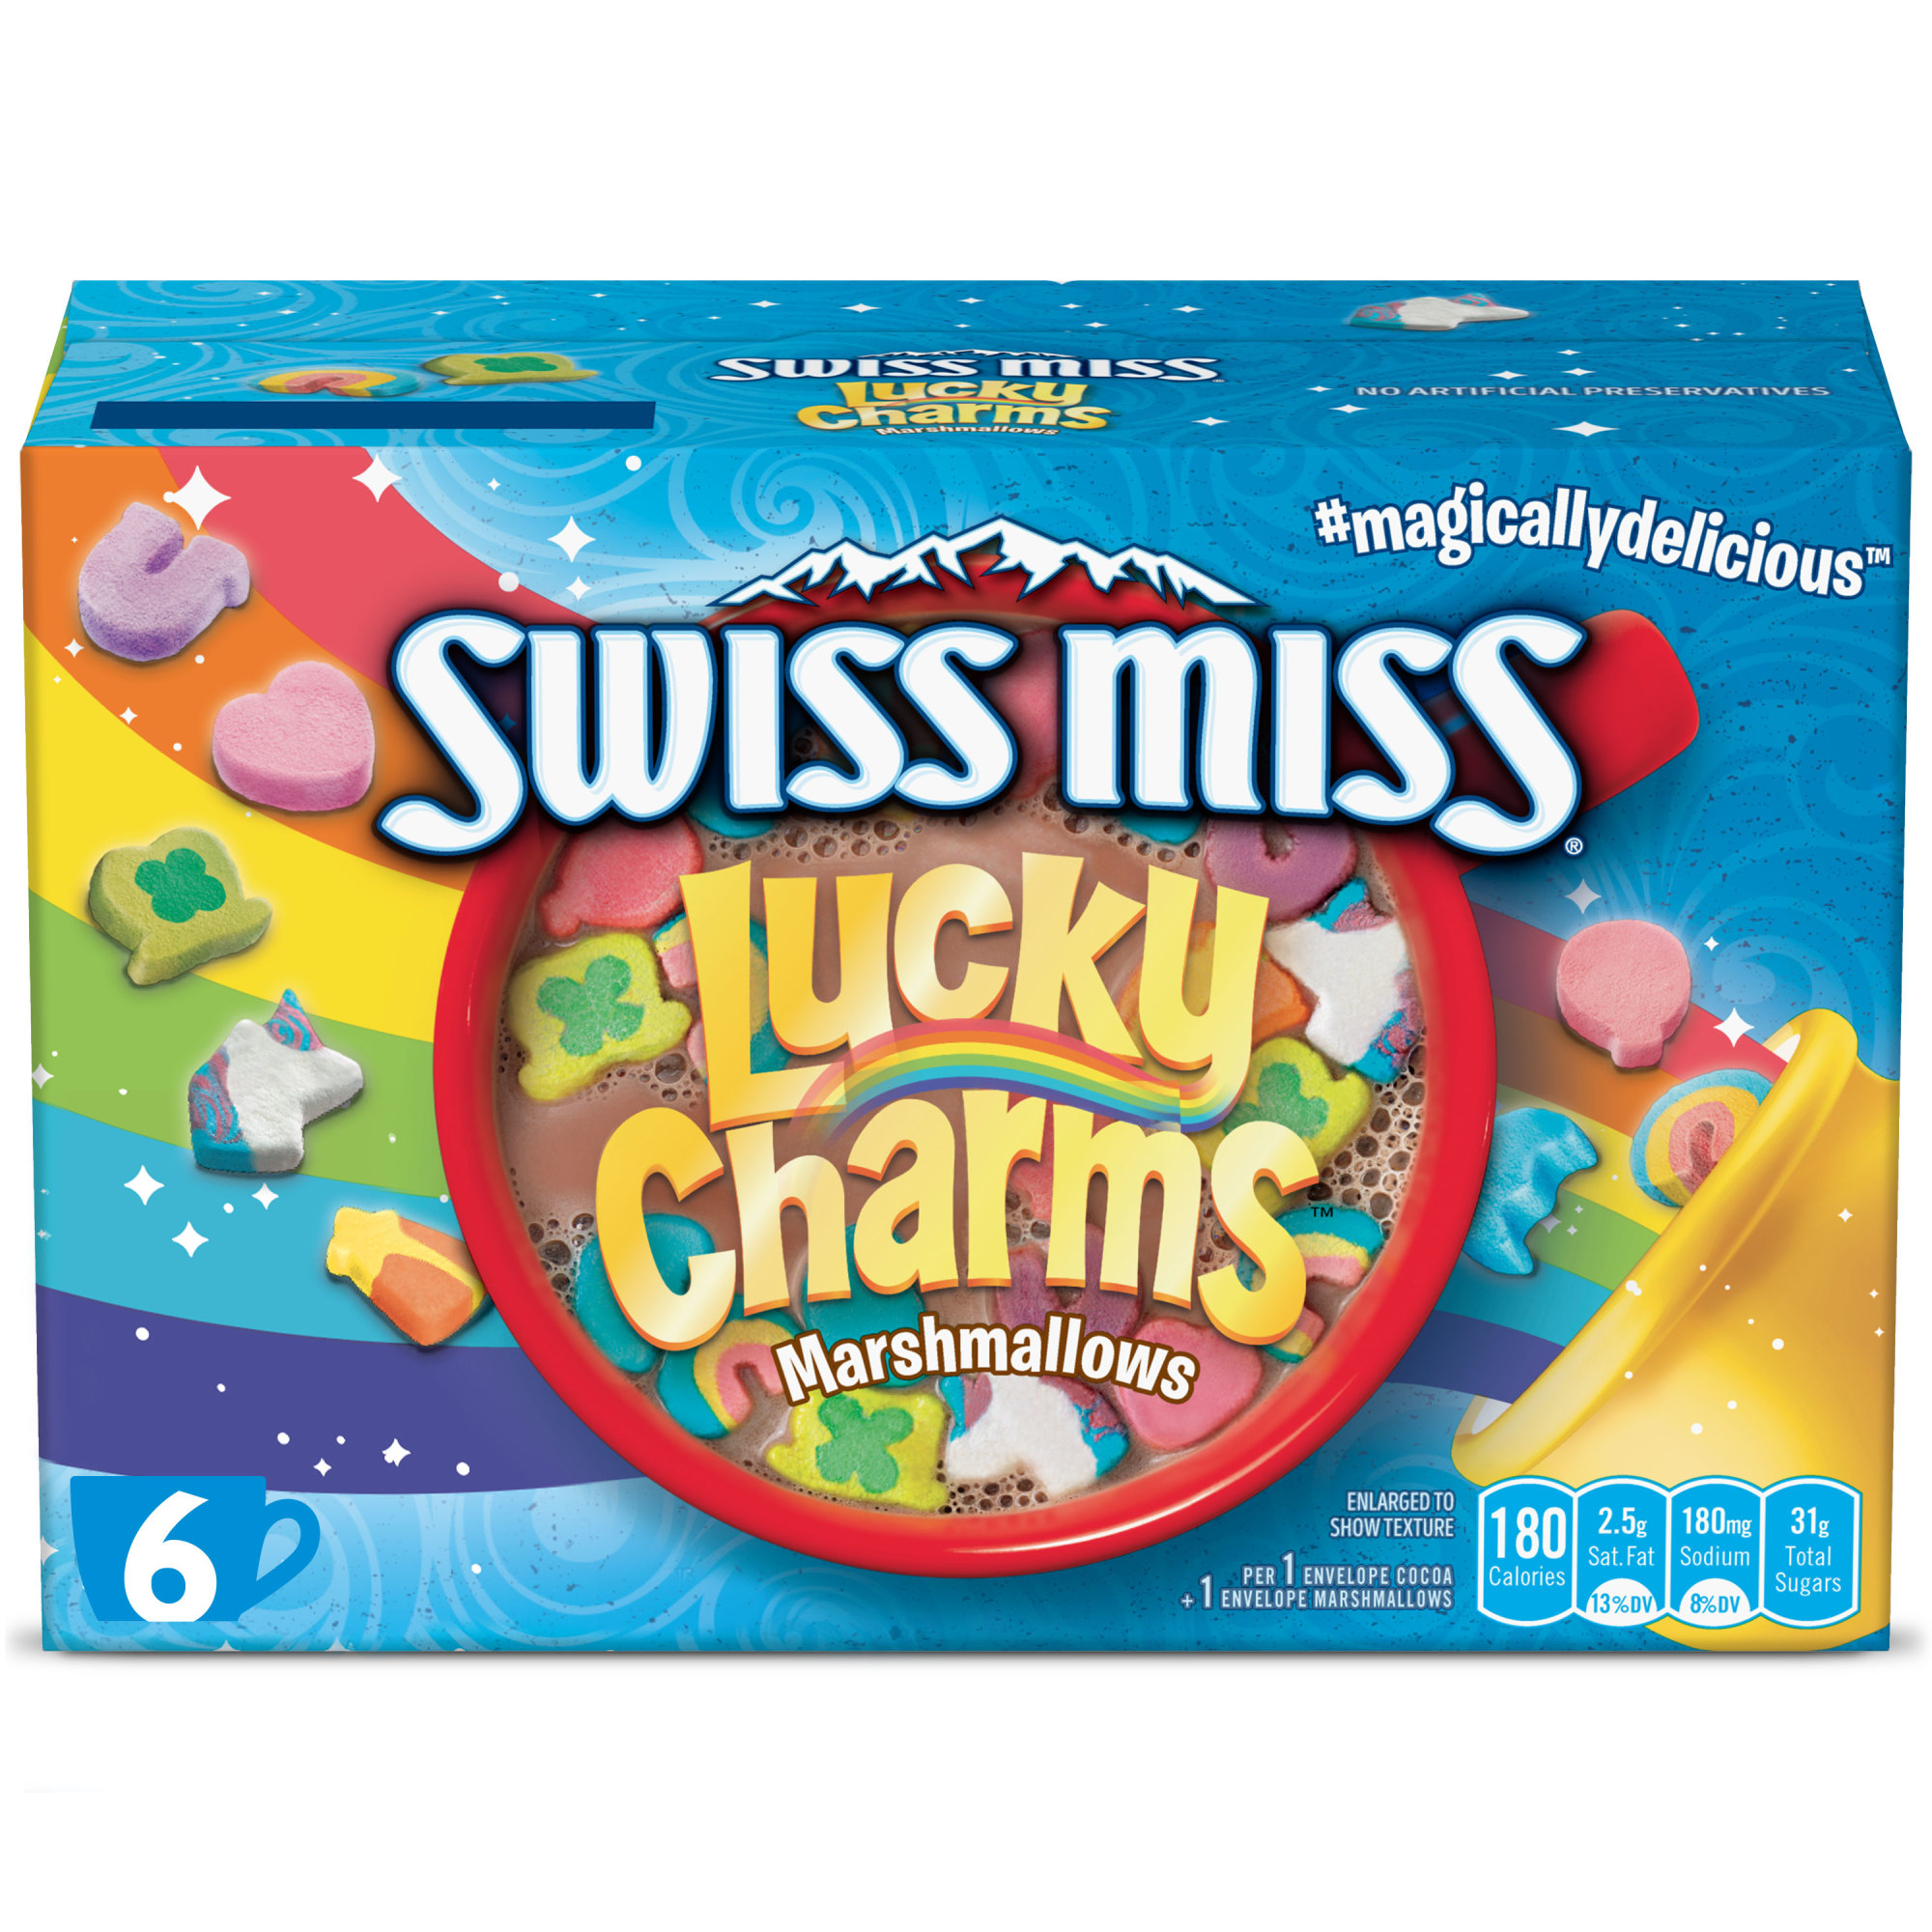 Swiss Miss Chocolate Flavored Hot Cocoa Mix with Lucky Charms Marshmallows, 6 Count Hot Cocoa Mix Packets - image 1 of 9